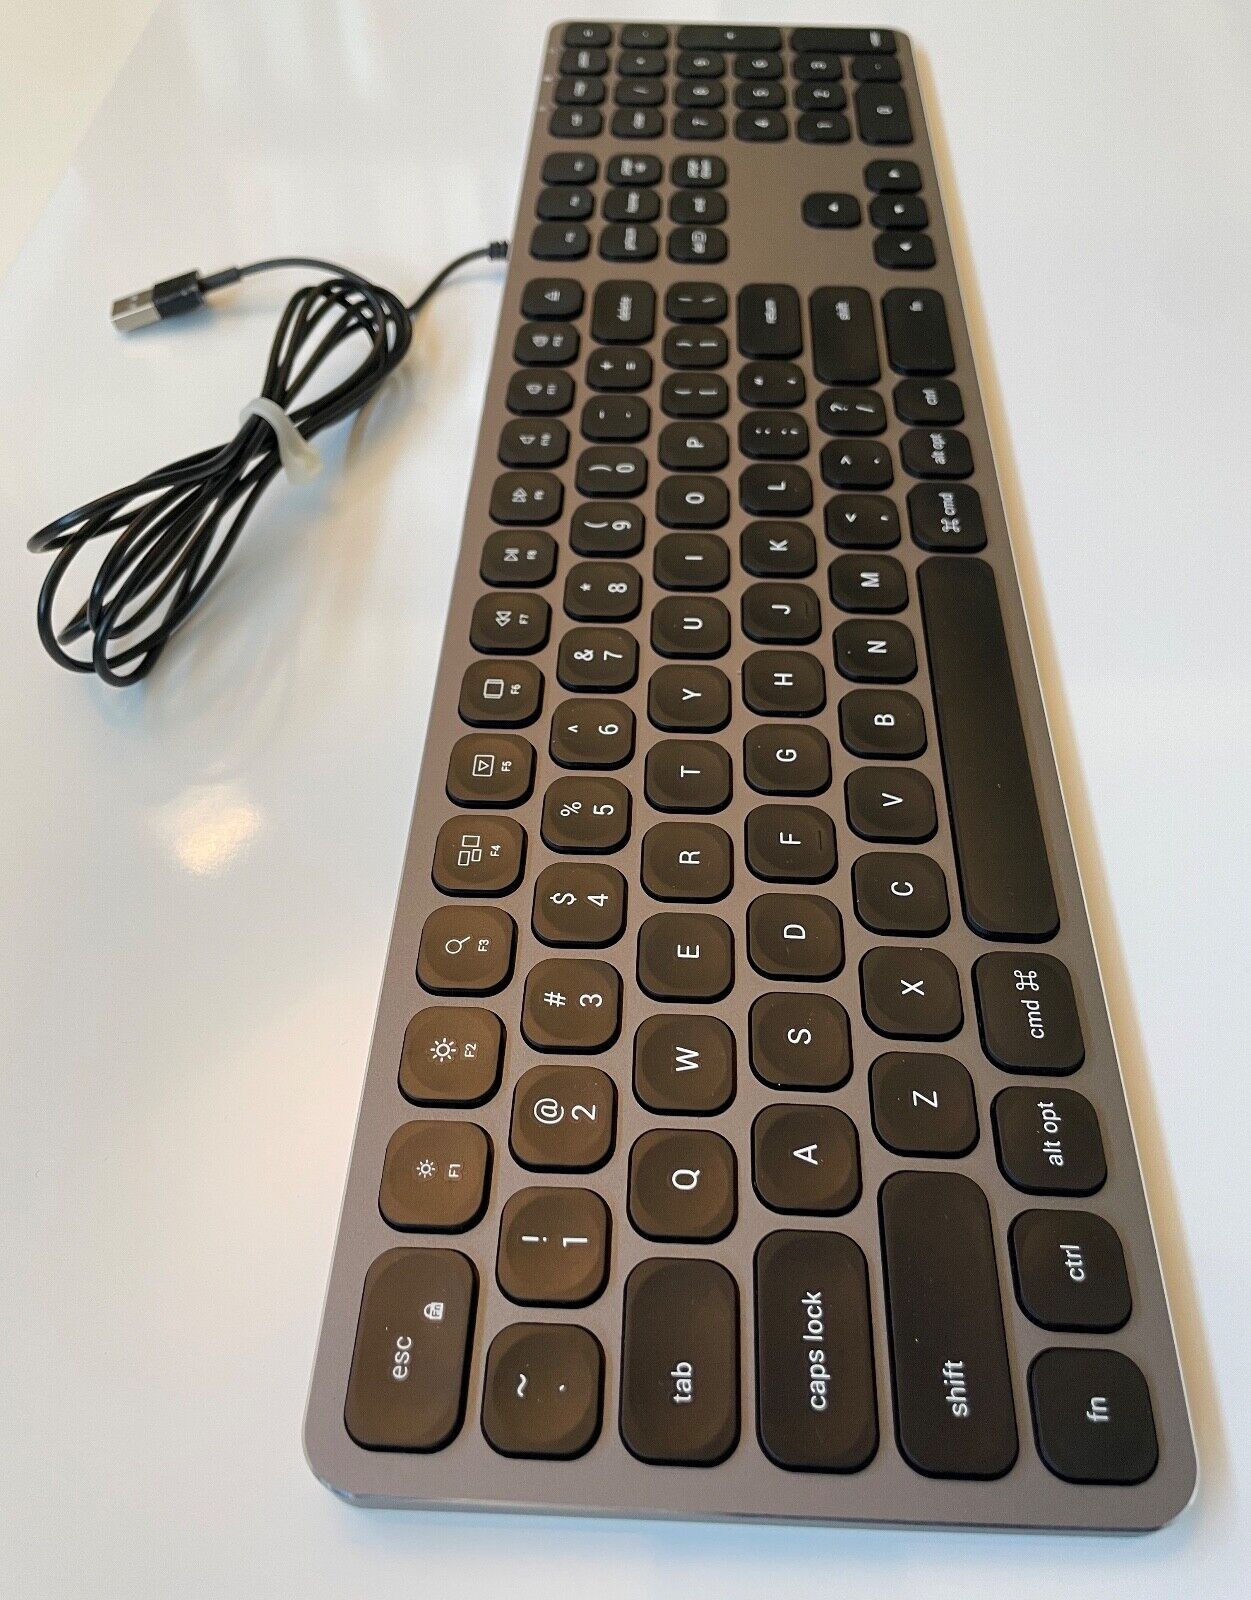 Satechi ST-AMWK Aluminum Wired USB Keyboard.  Tested, works CLEAN